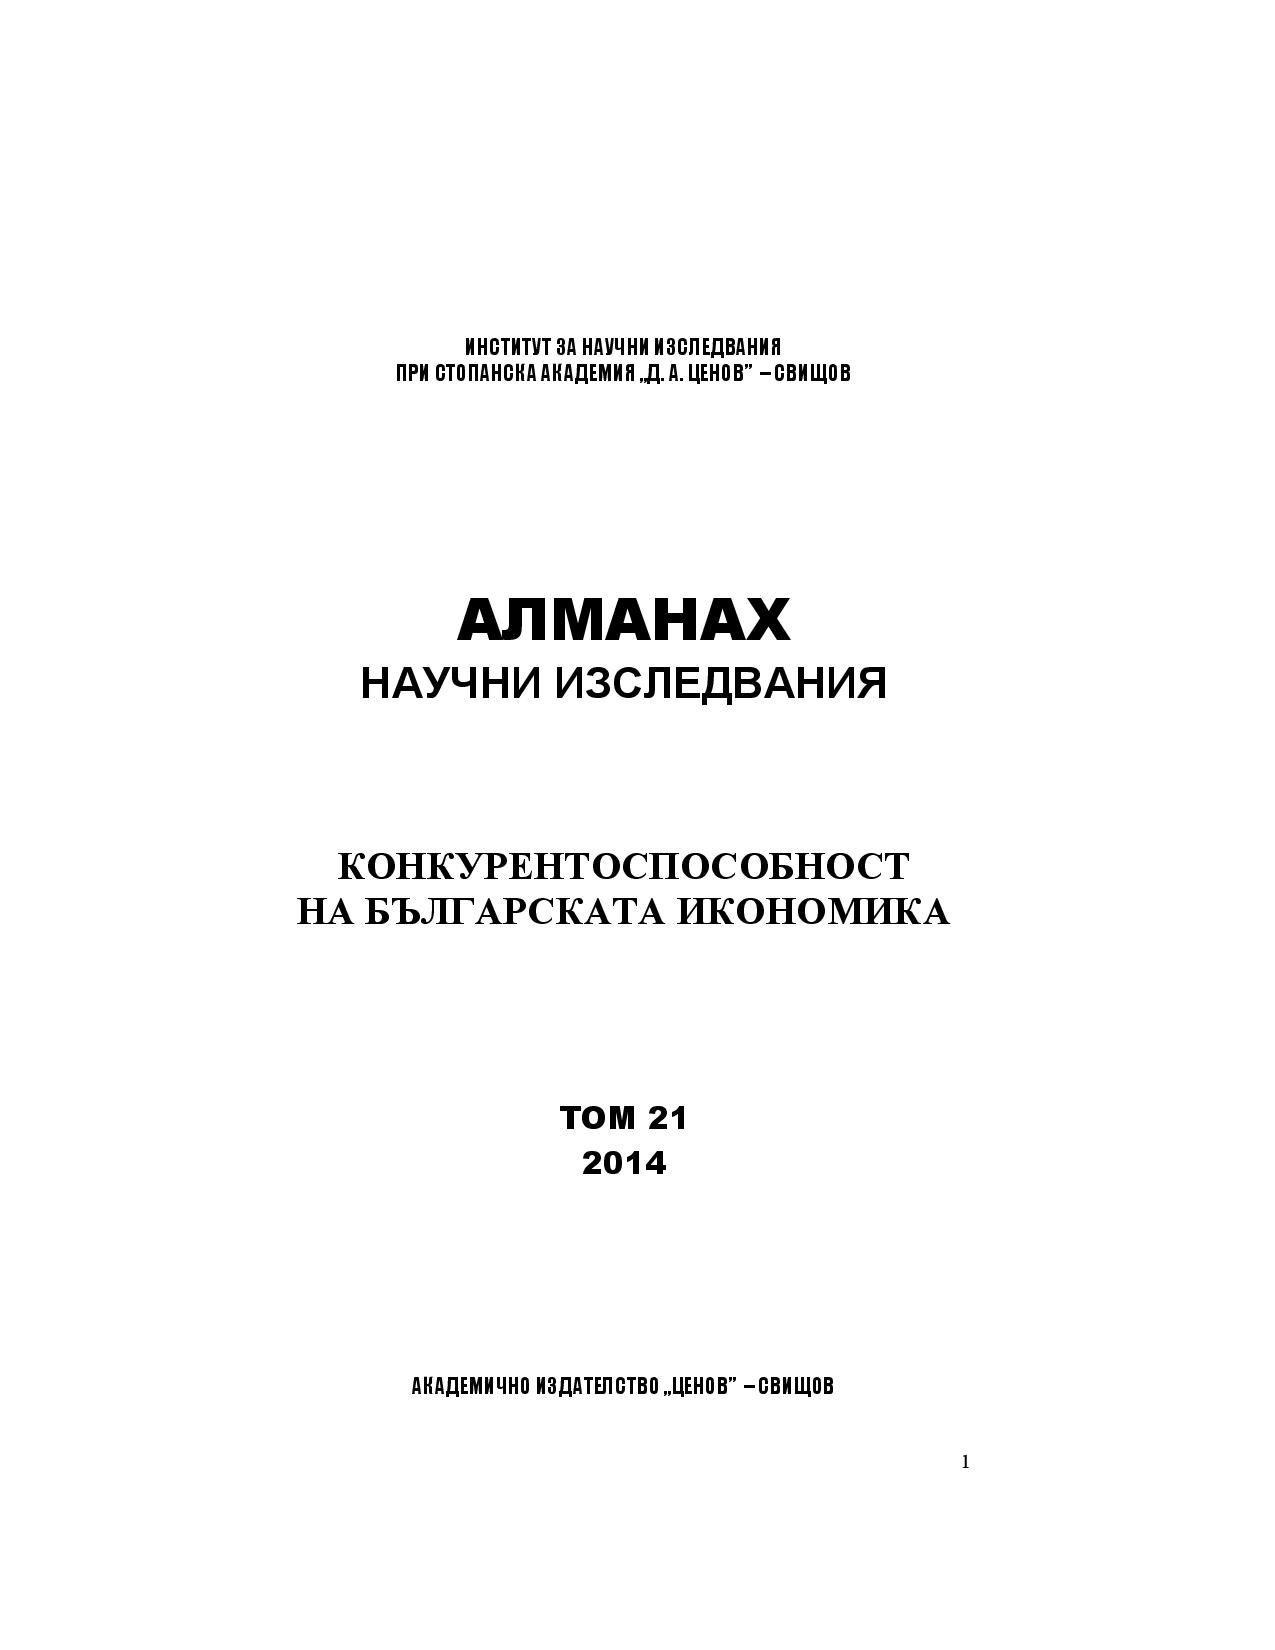 A COMPARATIVE STUDY OF THE ACTIVITIES AND THE RESULTS OF THE APPLICATION OF BLENDED LEARNING IN FOREIGN LANGUAGE AND NON-FOREIGN LANGUAGE SUBJECTS TAUGHT AT THE D. A. TSENOV ACADEMY OF ECONOMICS – SVISHTOV Cover Image